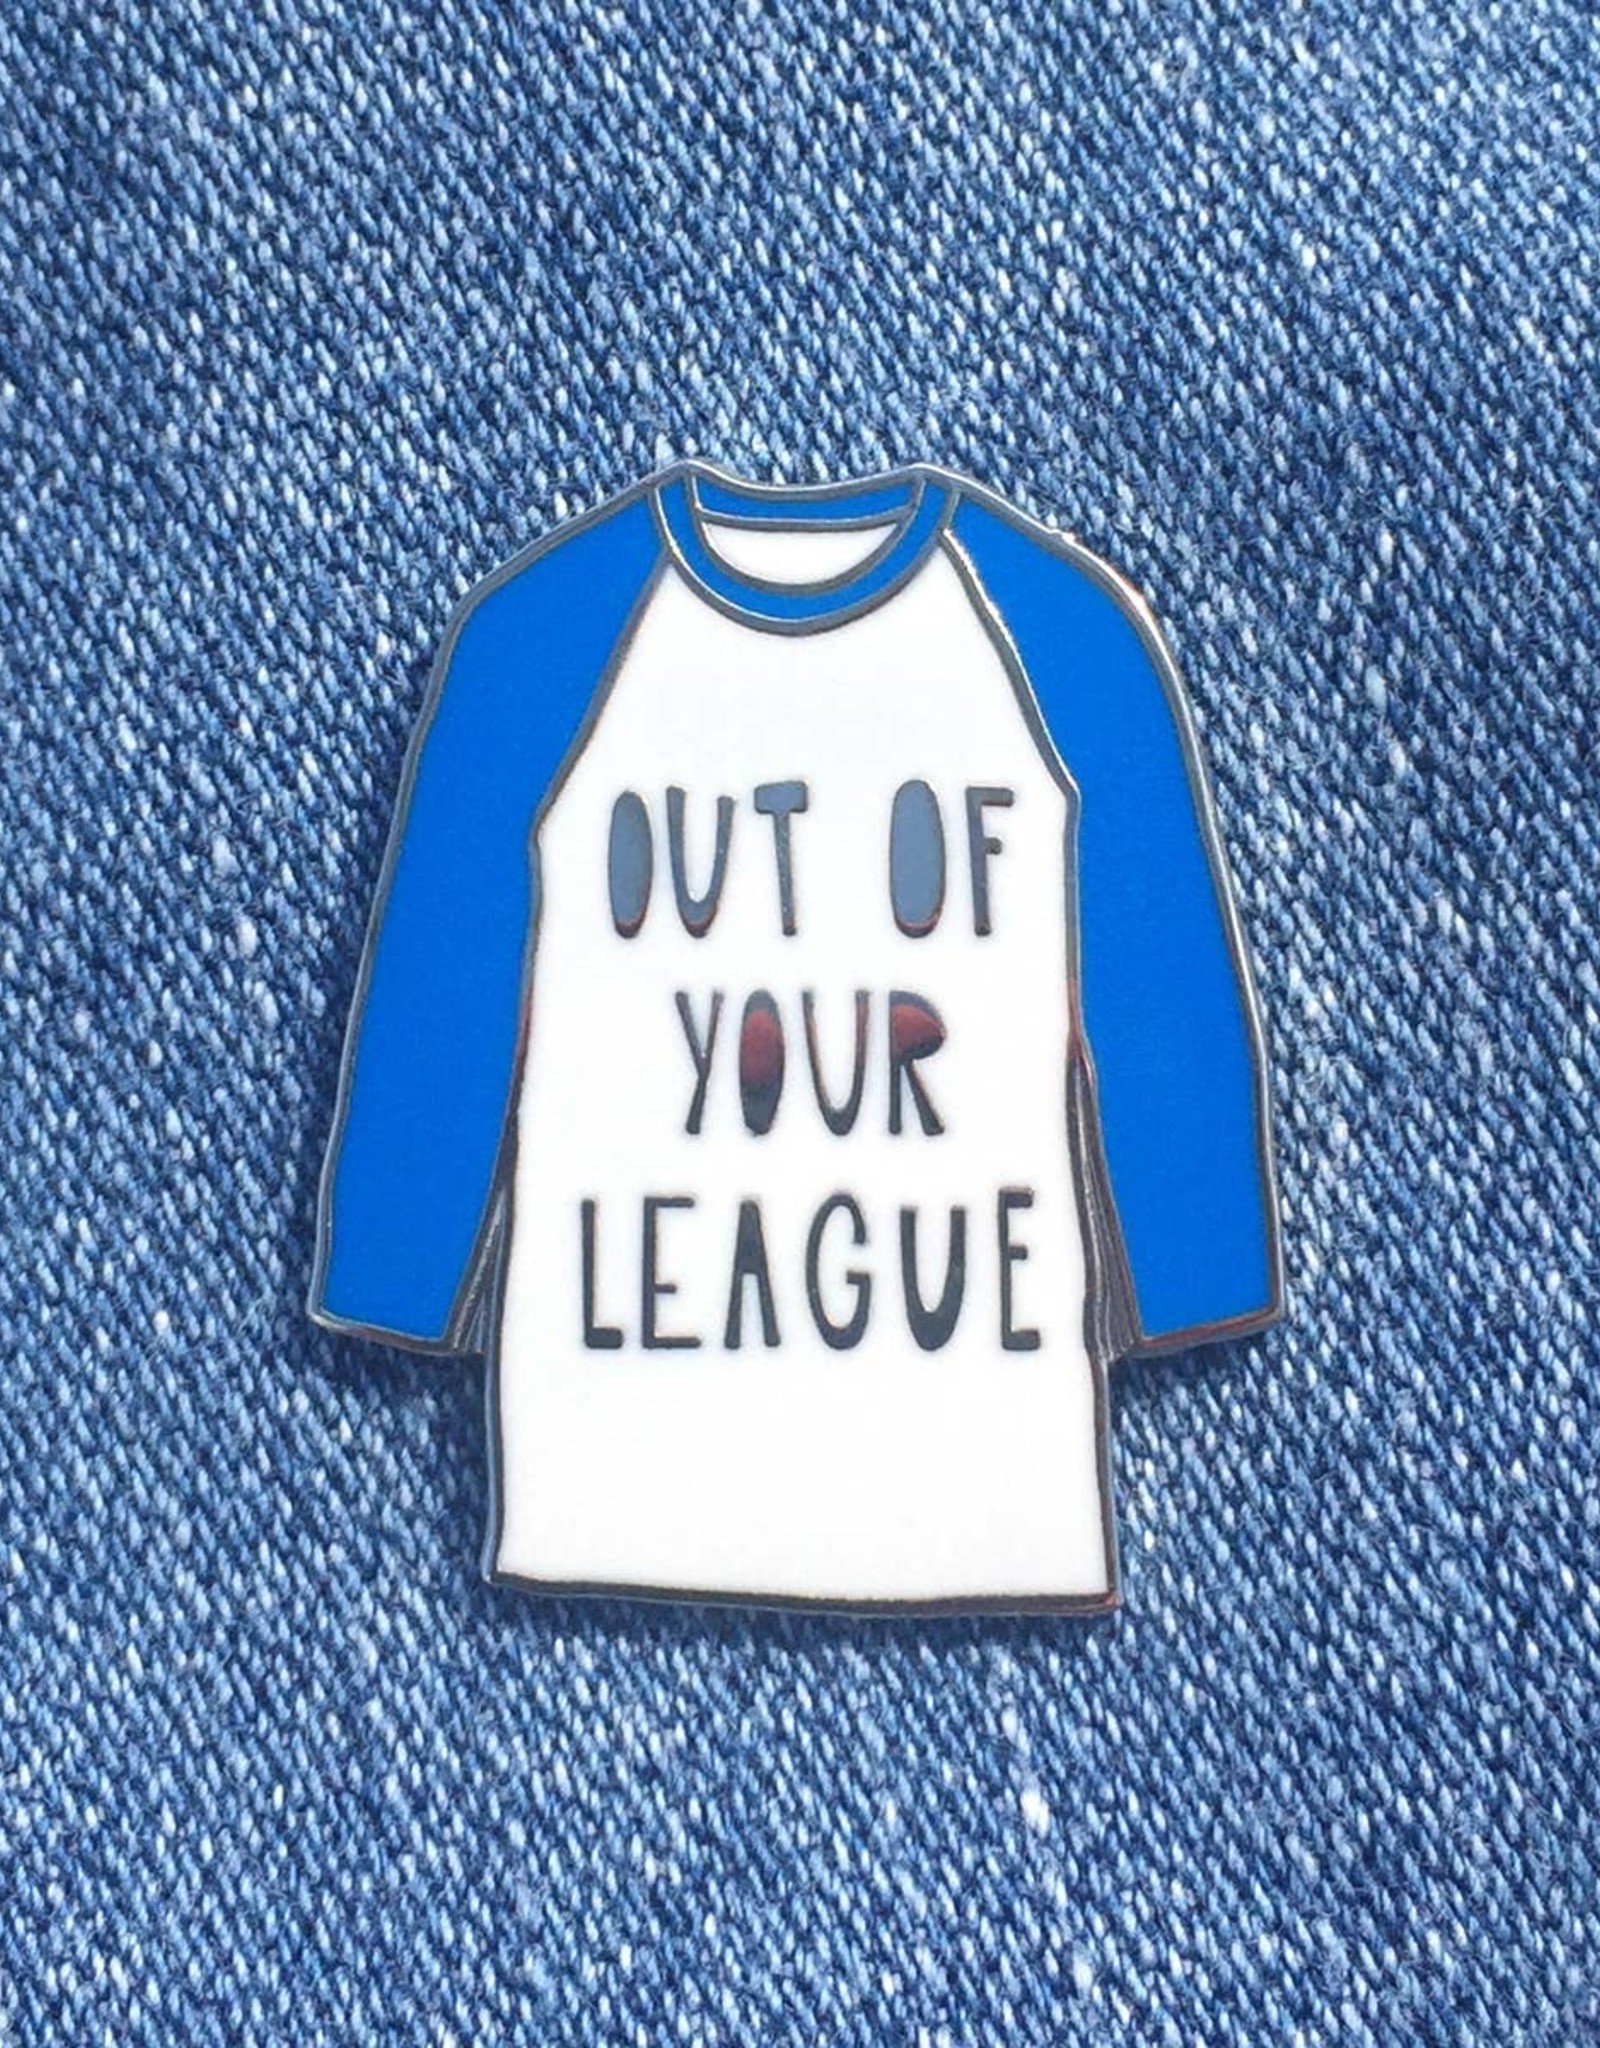 Near Modern Disaster Enamel Pin: Out of Your League